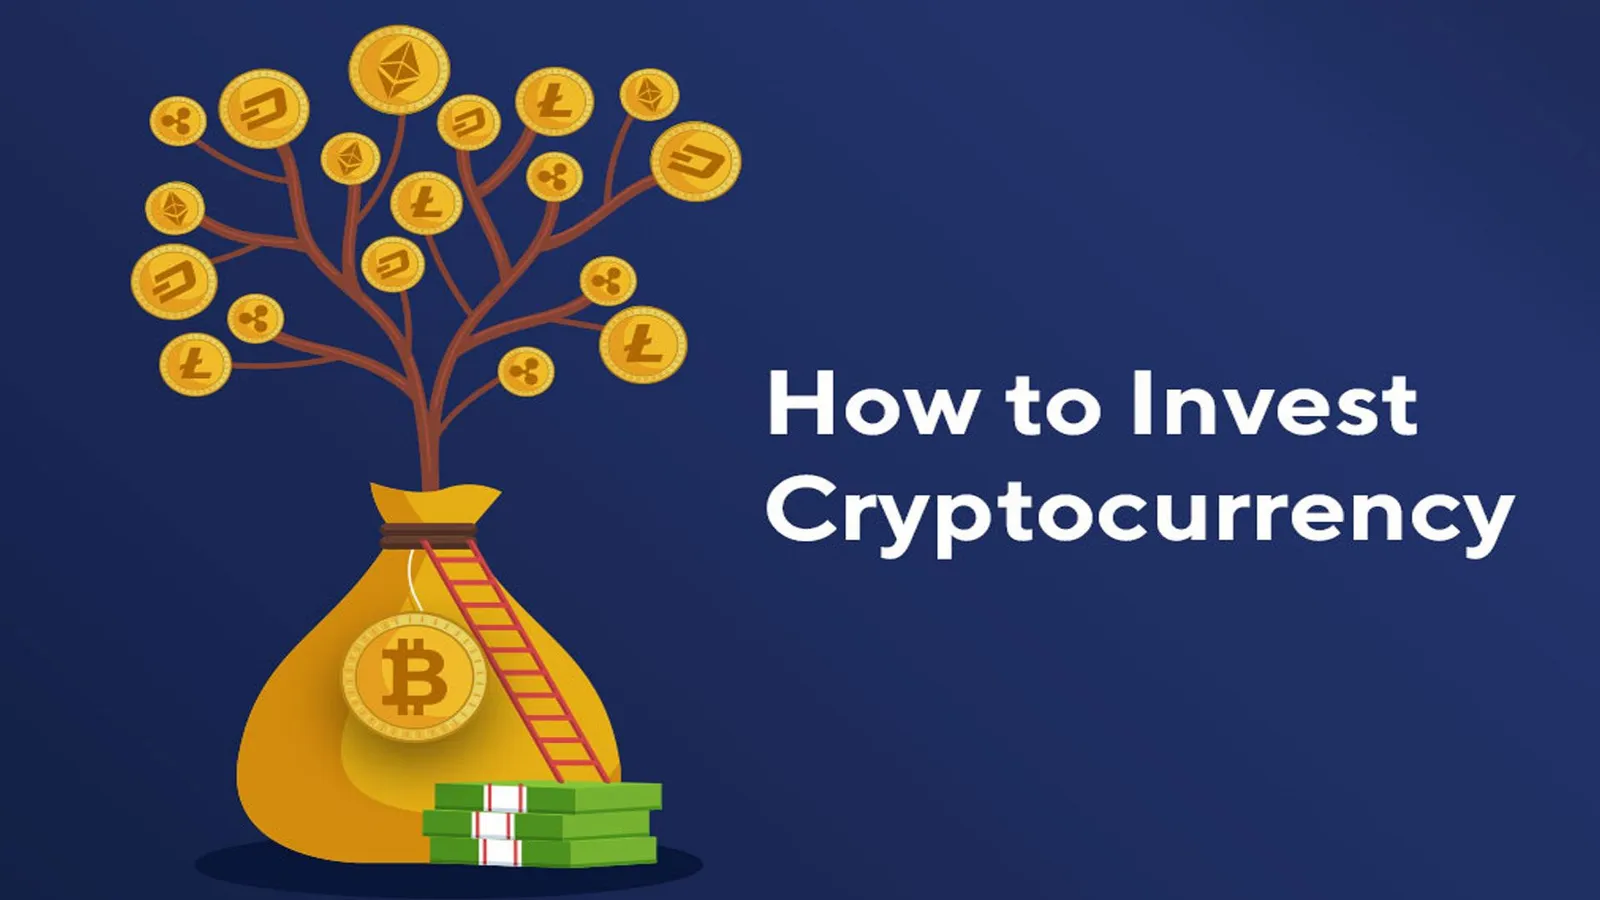 How To Invest In Cryptocurrency? by Ashley Nicole